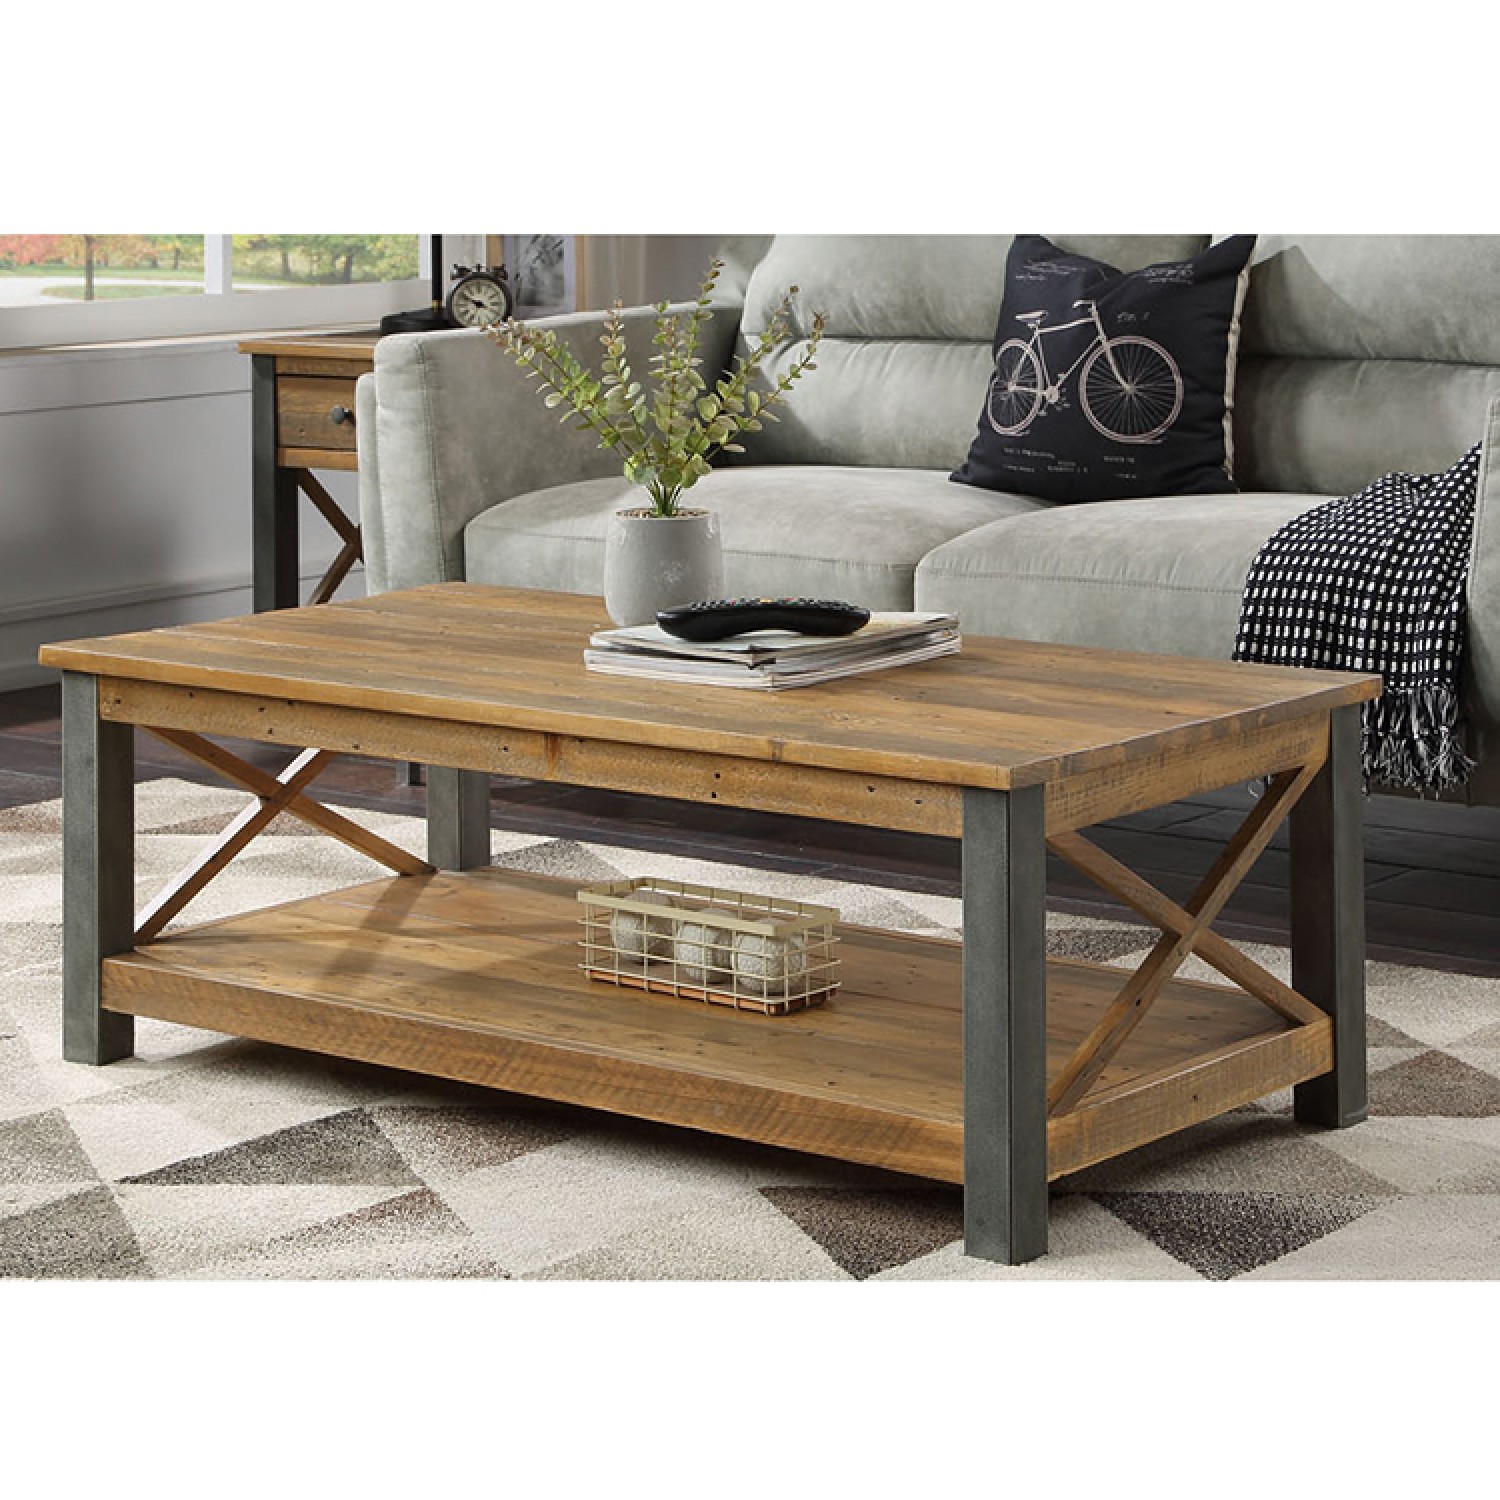 Details about   Modern Accent End Table Sofa Side Table w/1 Open Storage Shelf 1 Removable Shelf